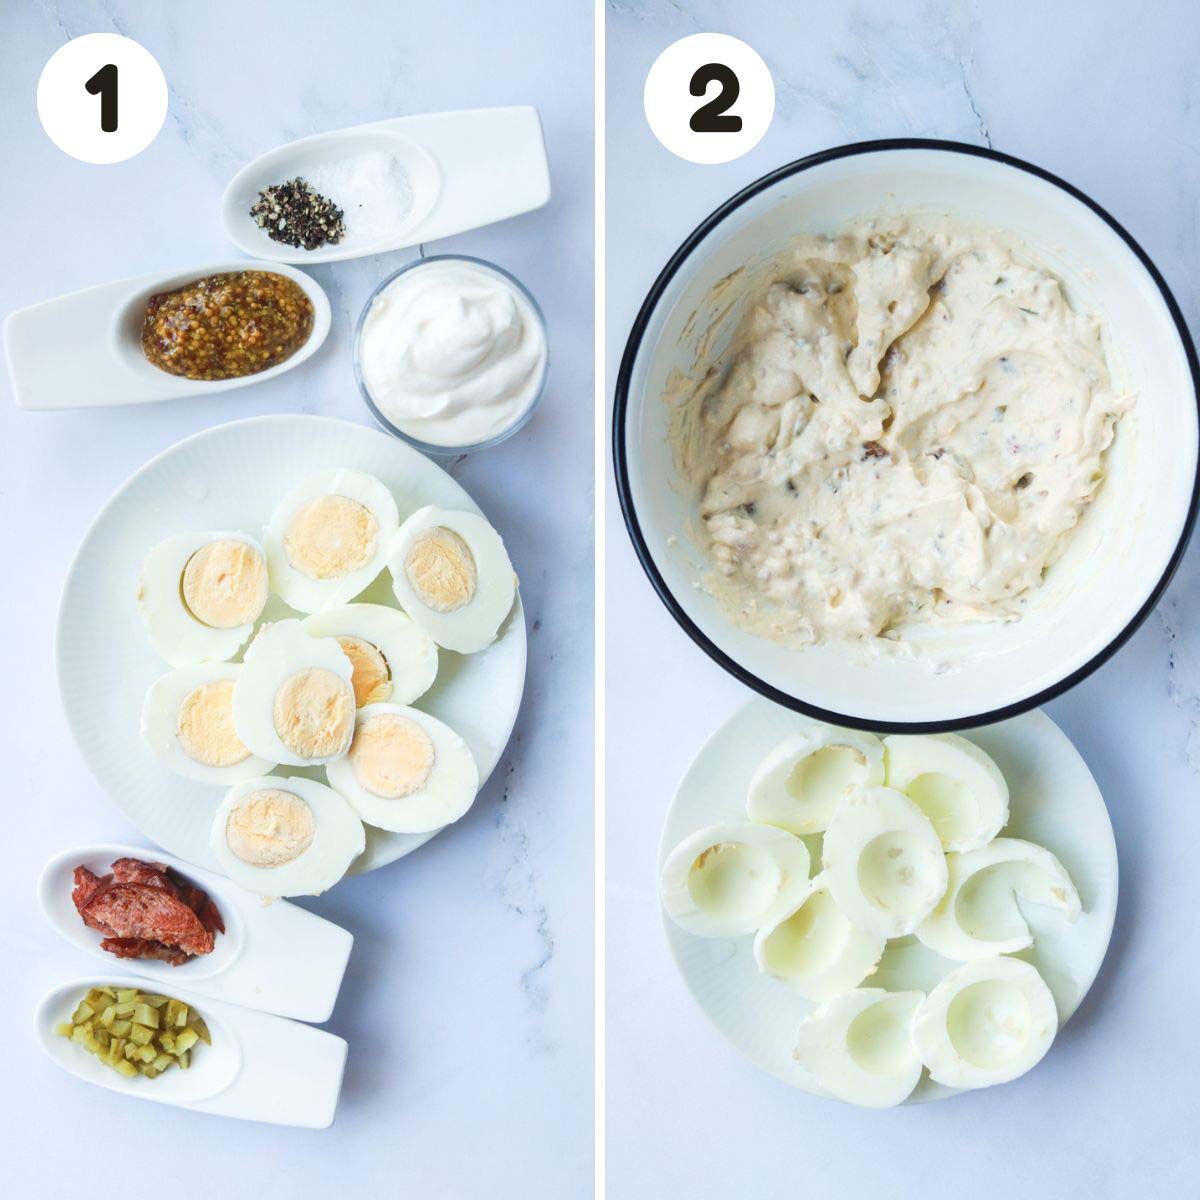 Steps to make the deviled eggs.